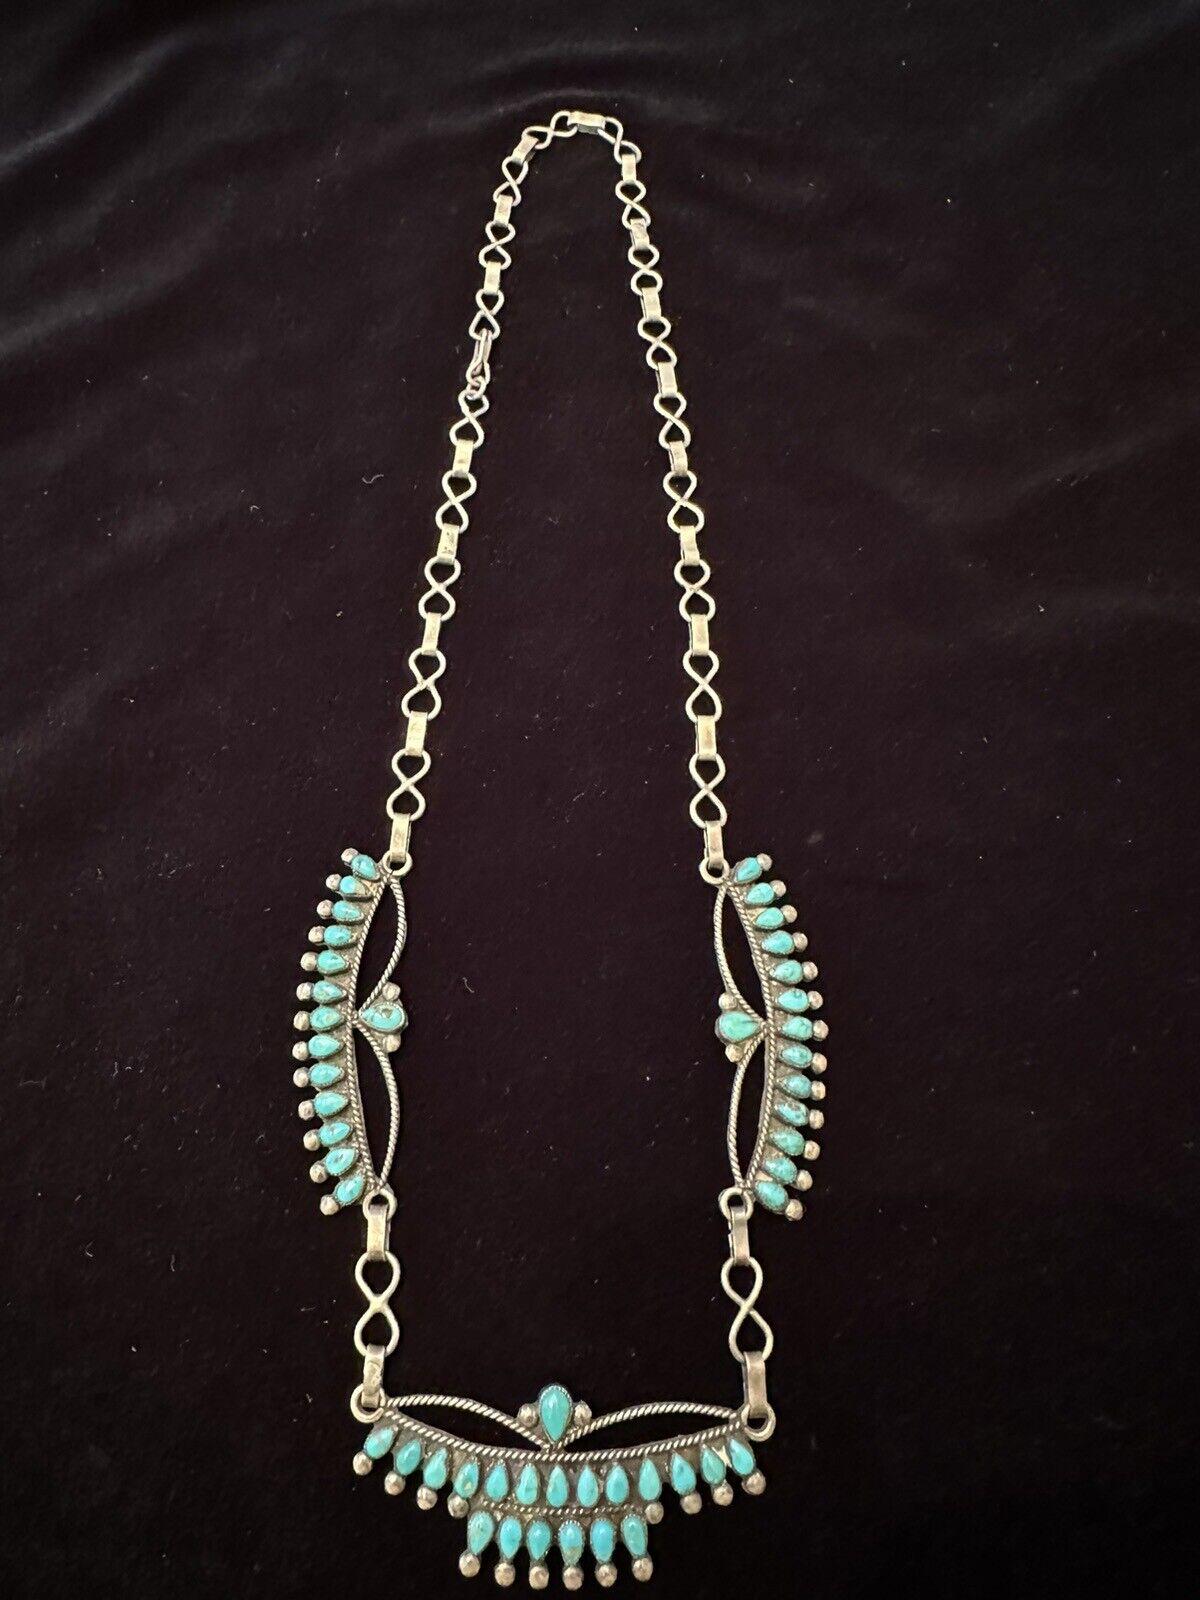 Simply Beautiful! Vintage Old Zuni Southwestern Native American Turquoise and Sterling Silver Squash Blossom Necklace. Approx. 23